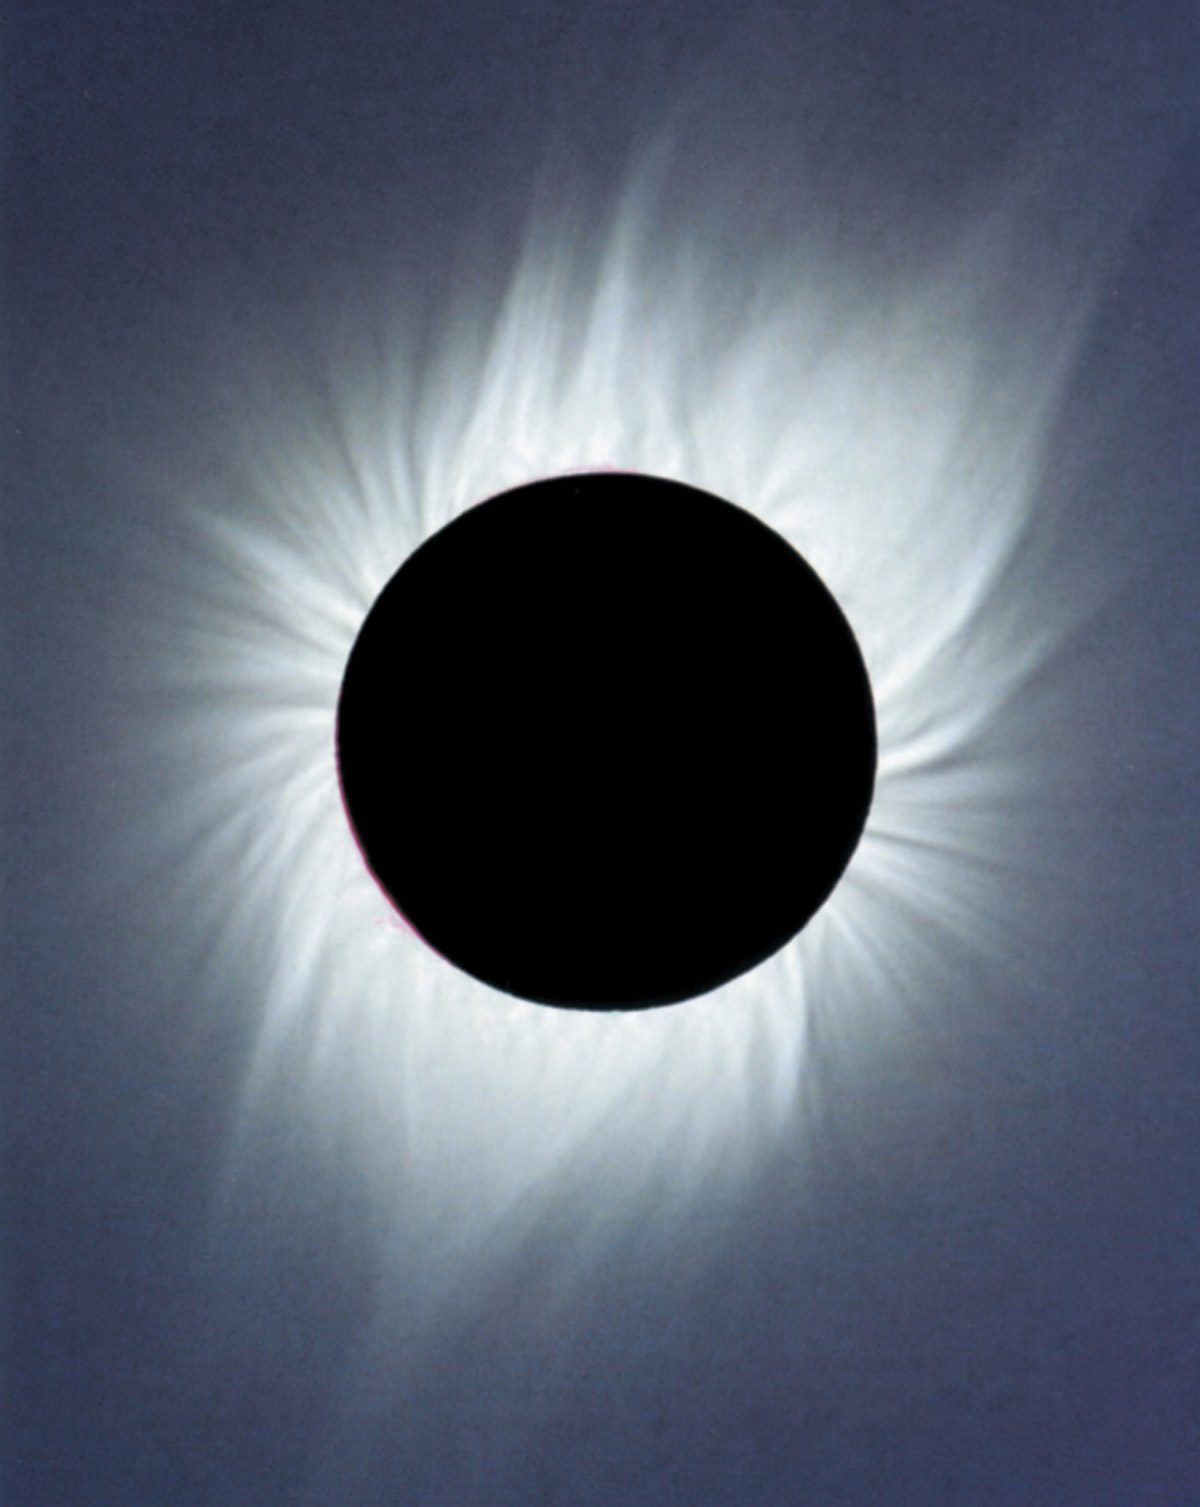 A photograph by Fred Espianak of a solar eclipse, 26 February 1998.